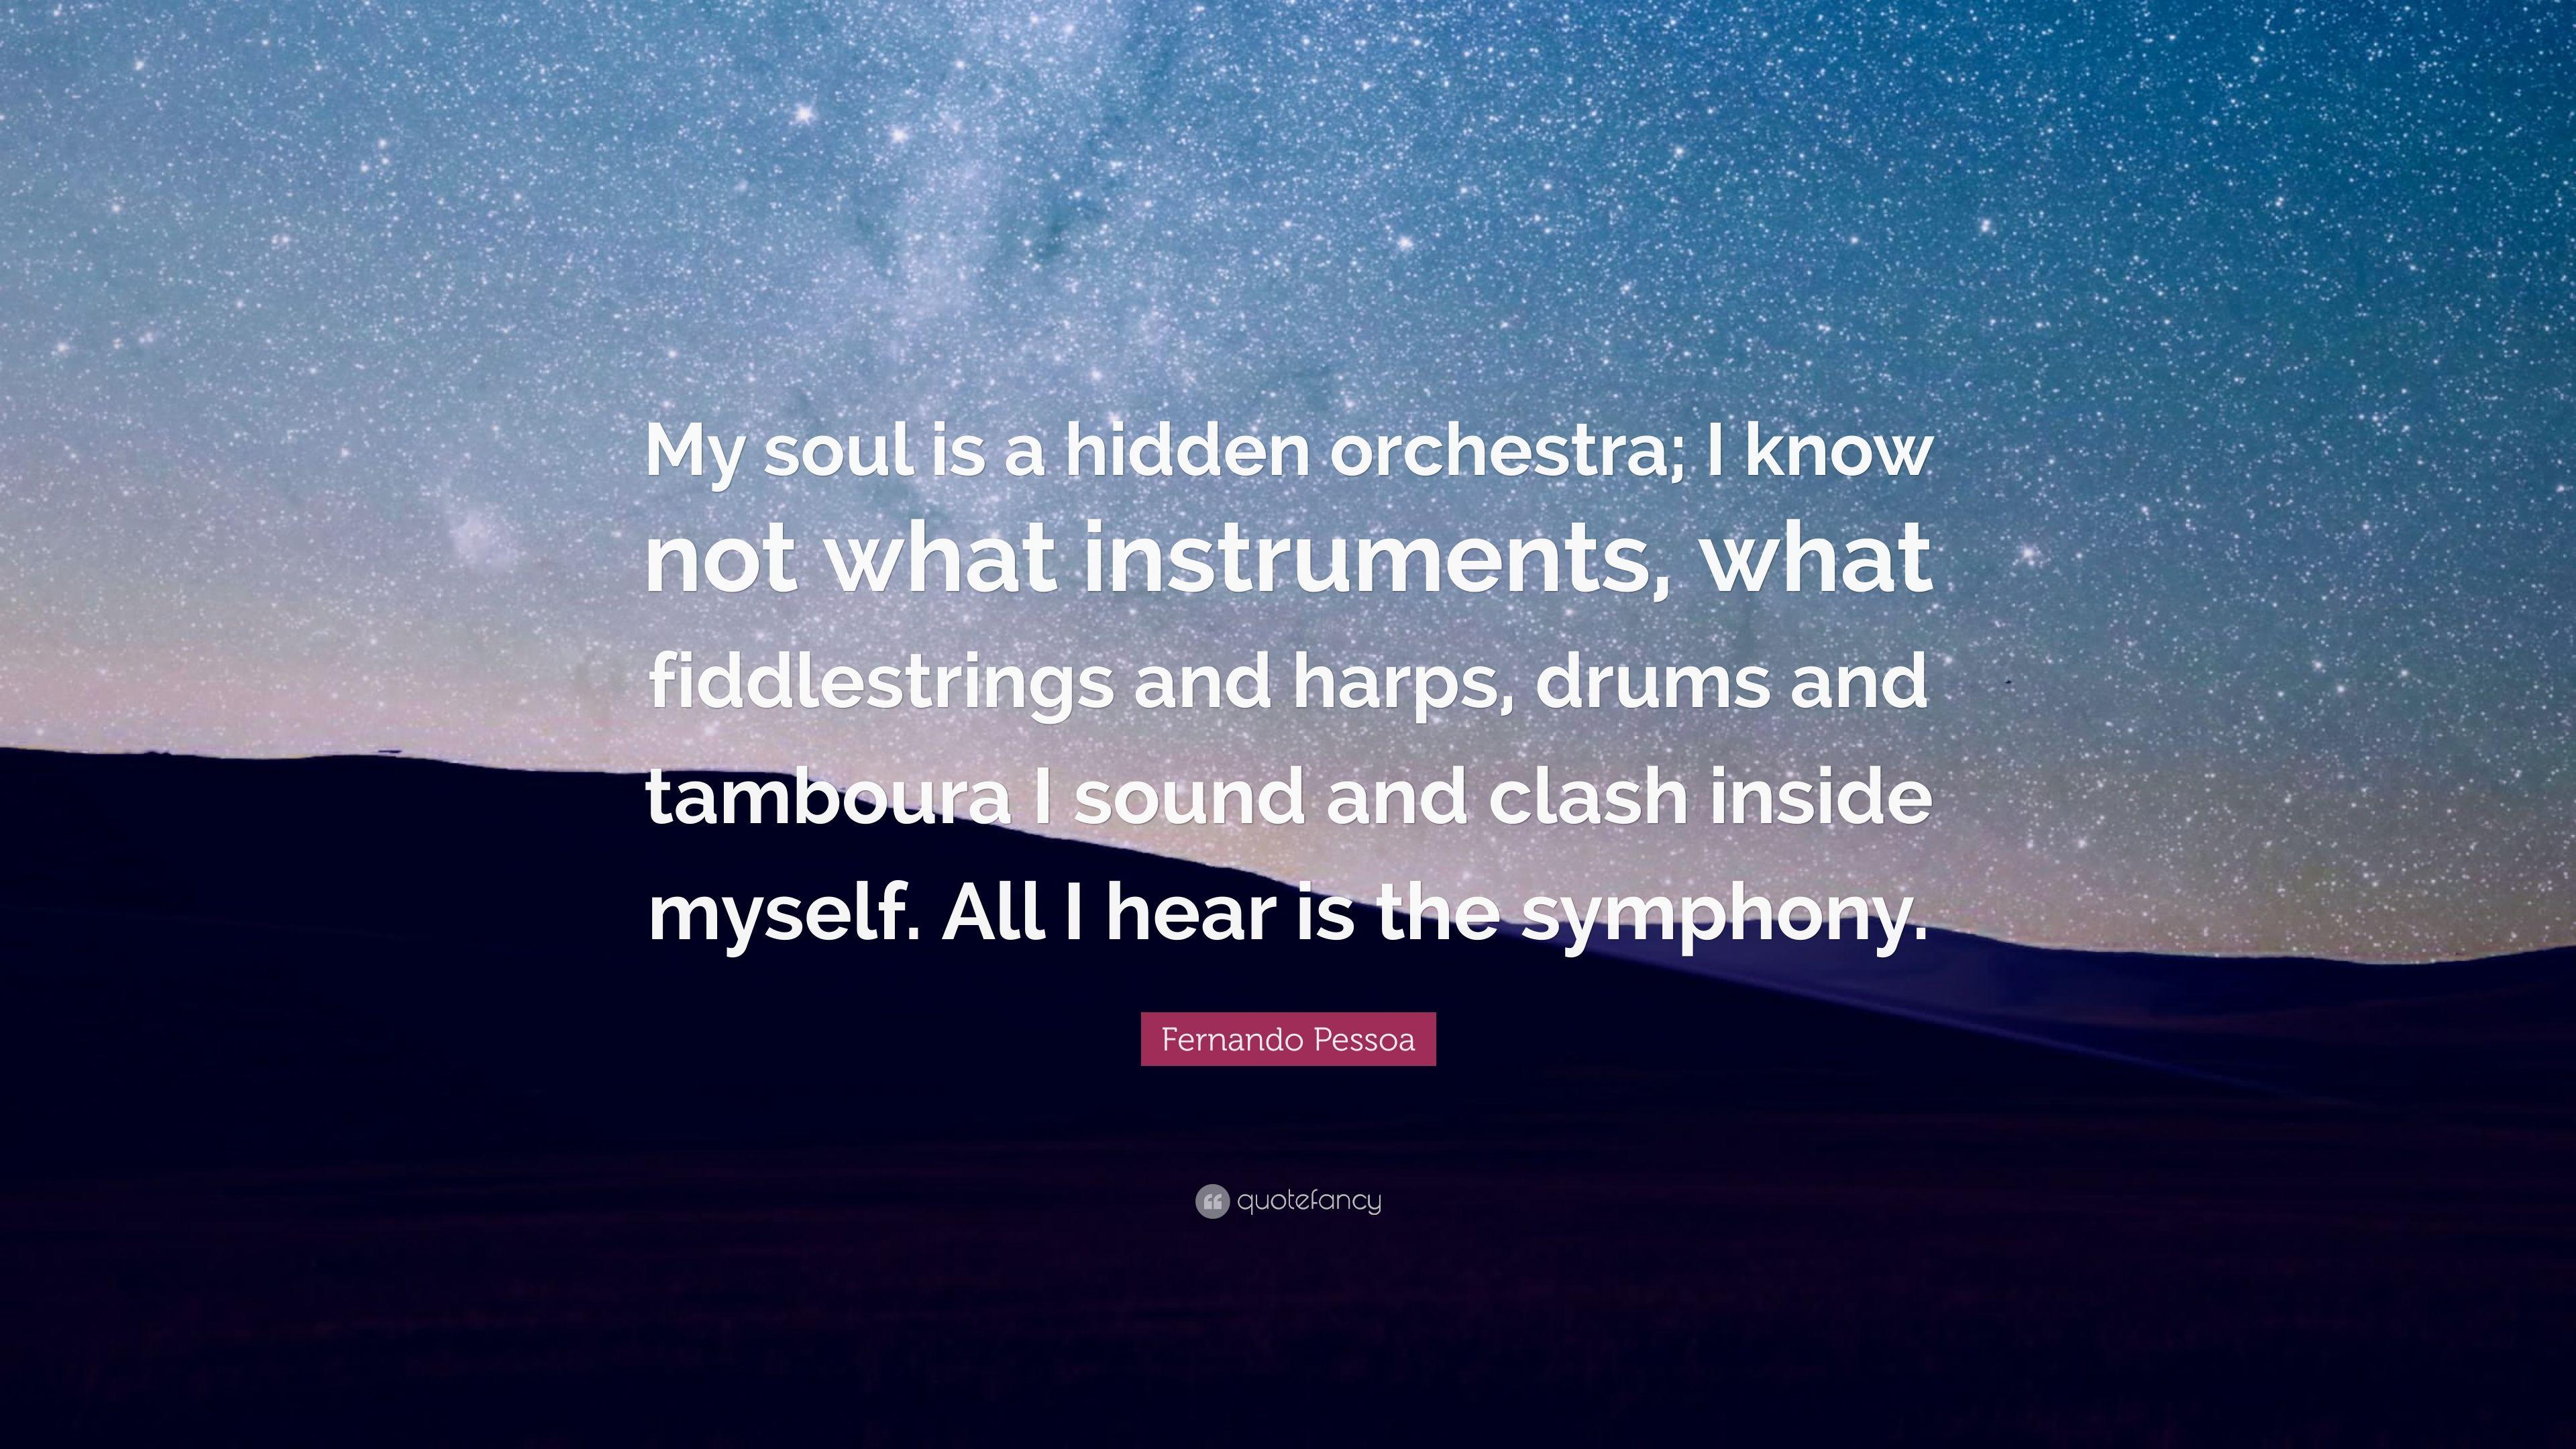 Fernando Pessoa Quote: “My soul is a hidden orchestra; I know not